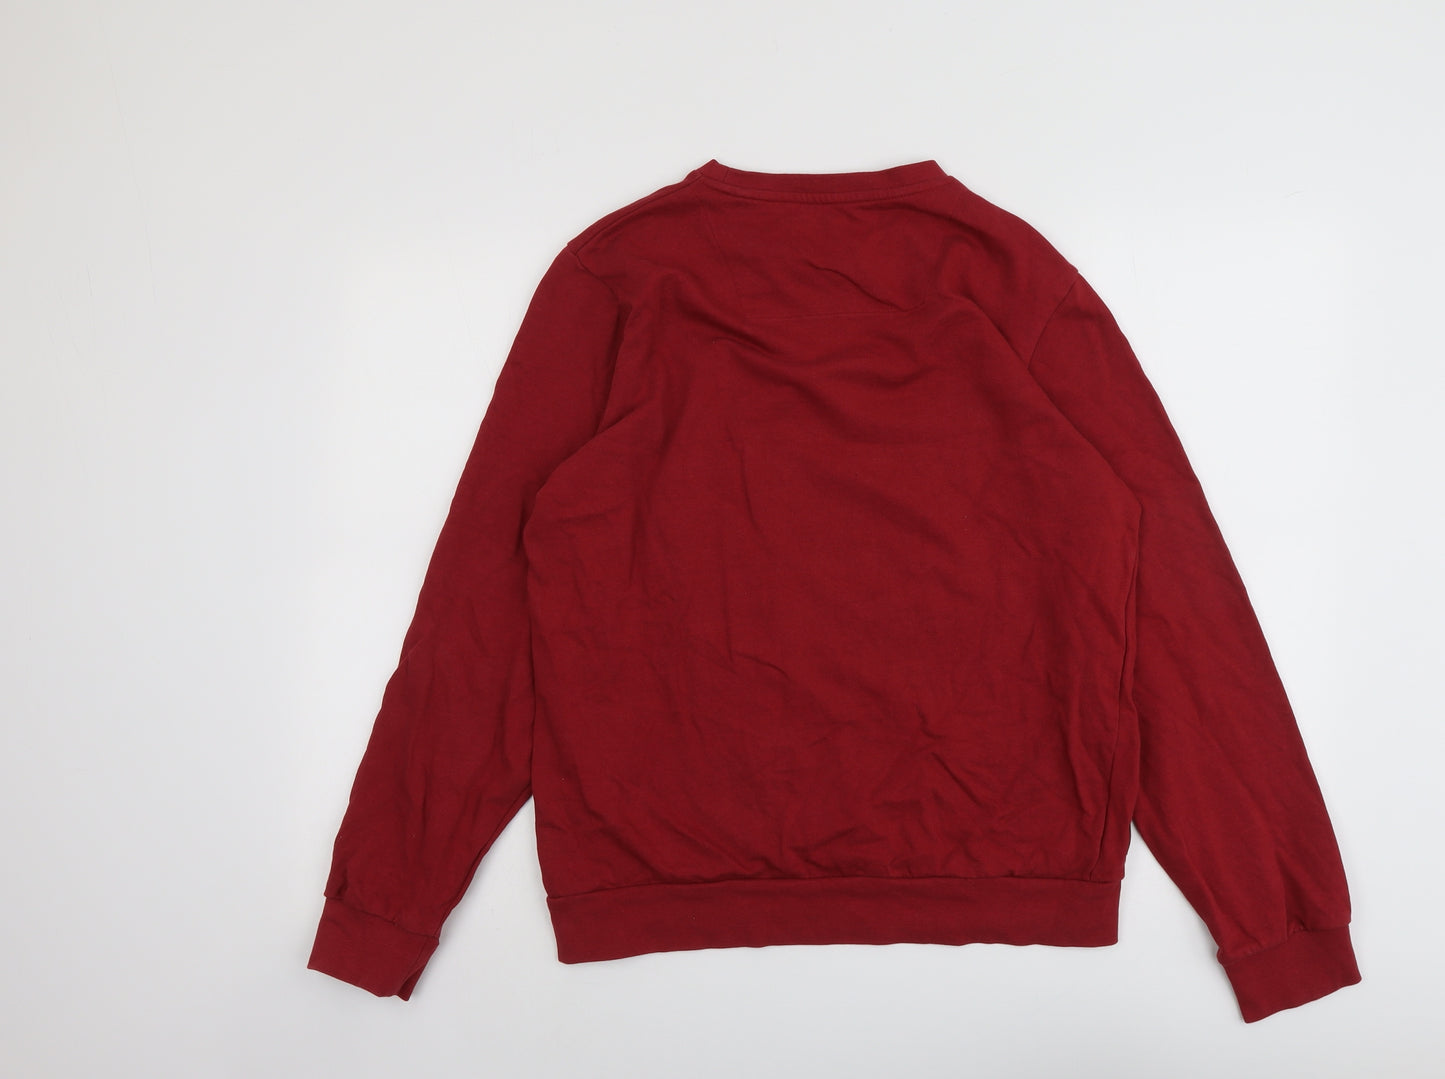 Threadbare Womens Red Cotton Pullover Sweatshirt Size L Pullover - All I want for Christmas is booze Unisex